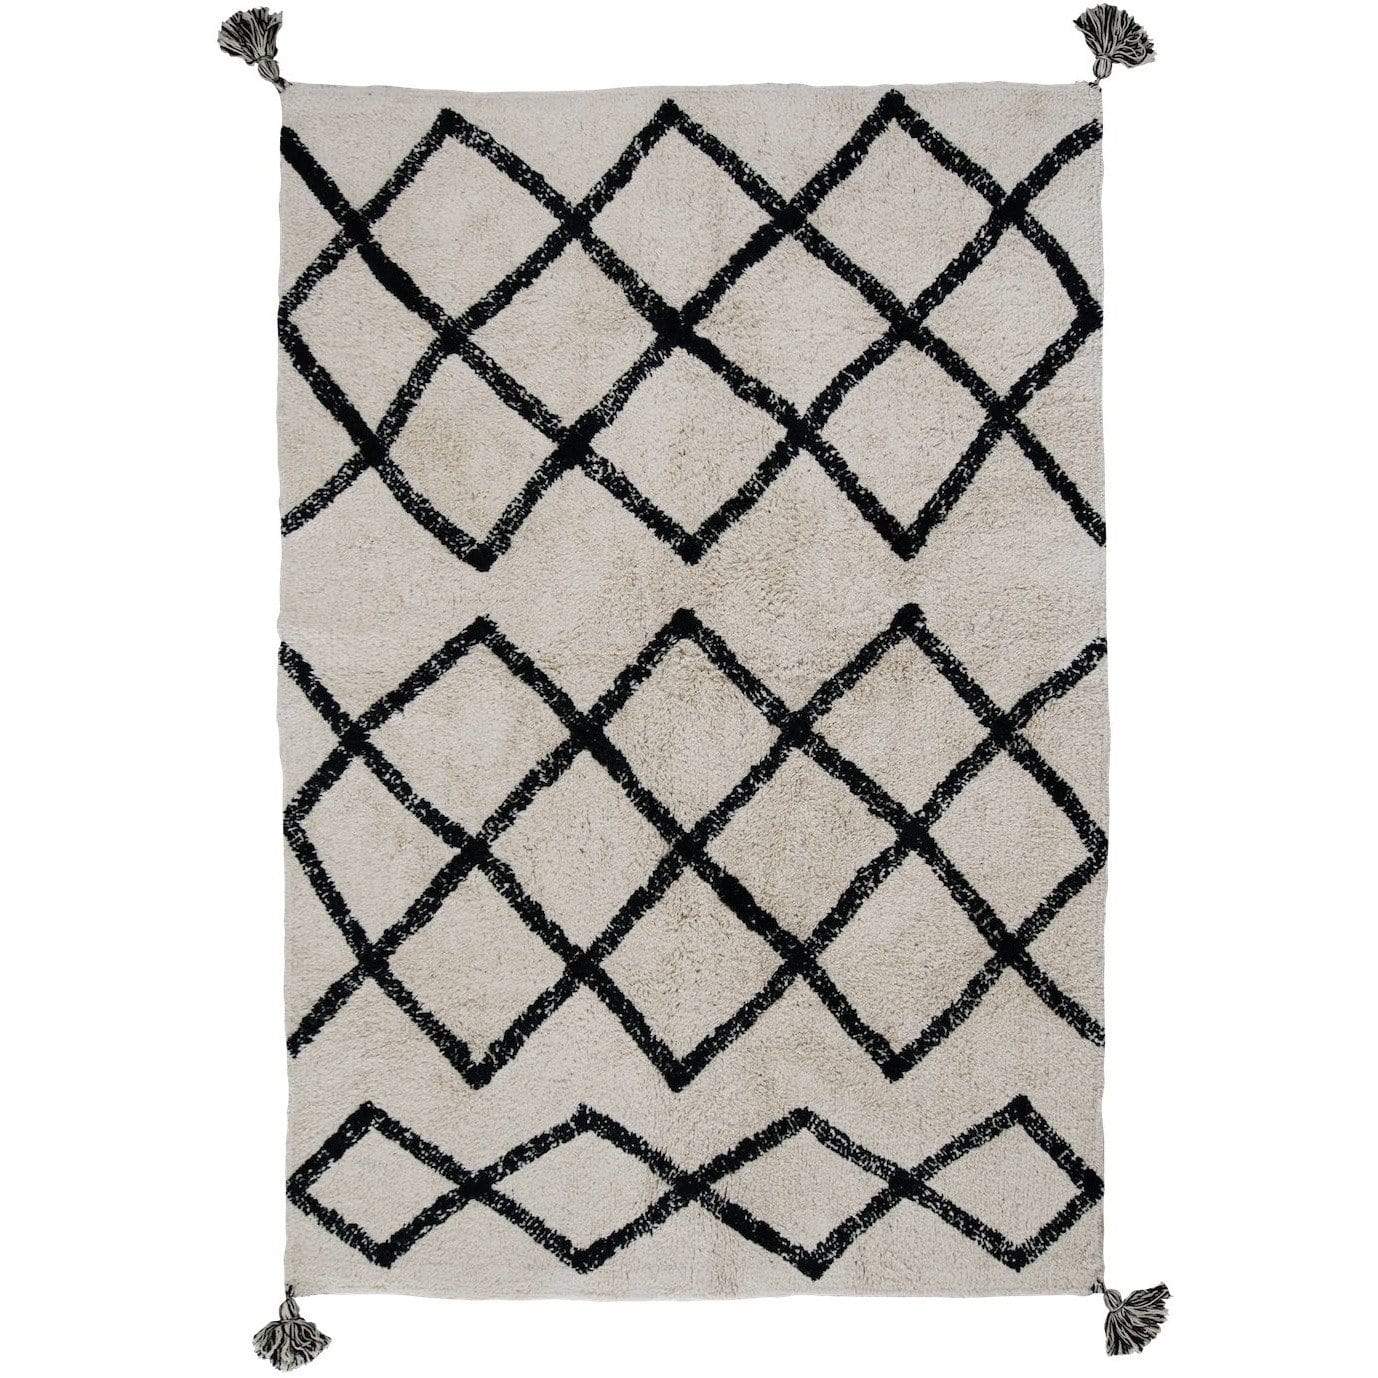 Rugs by Roo | Oh Happy Home! Cotton Berber Black Washable Area Rug-SHF-CBR-BLK